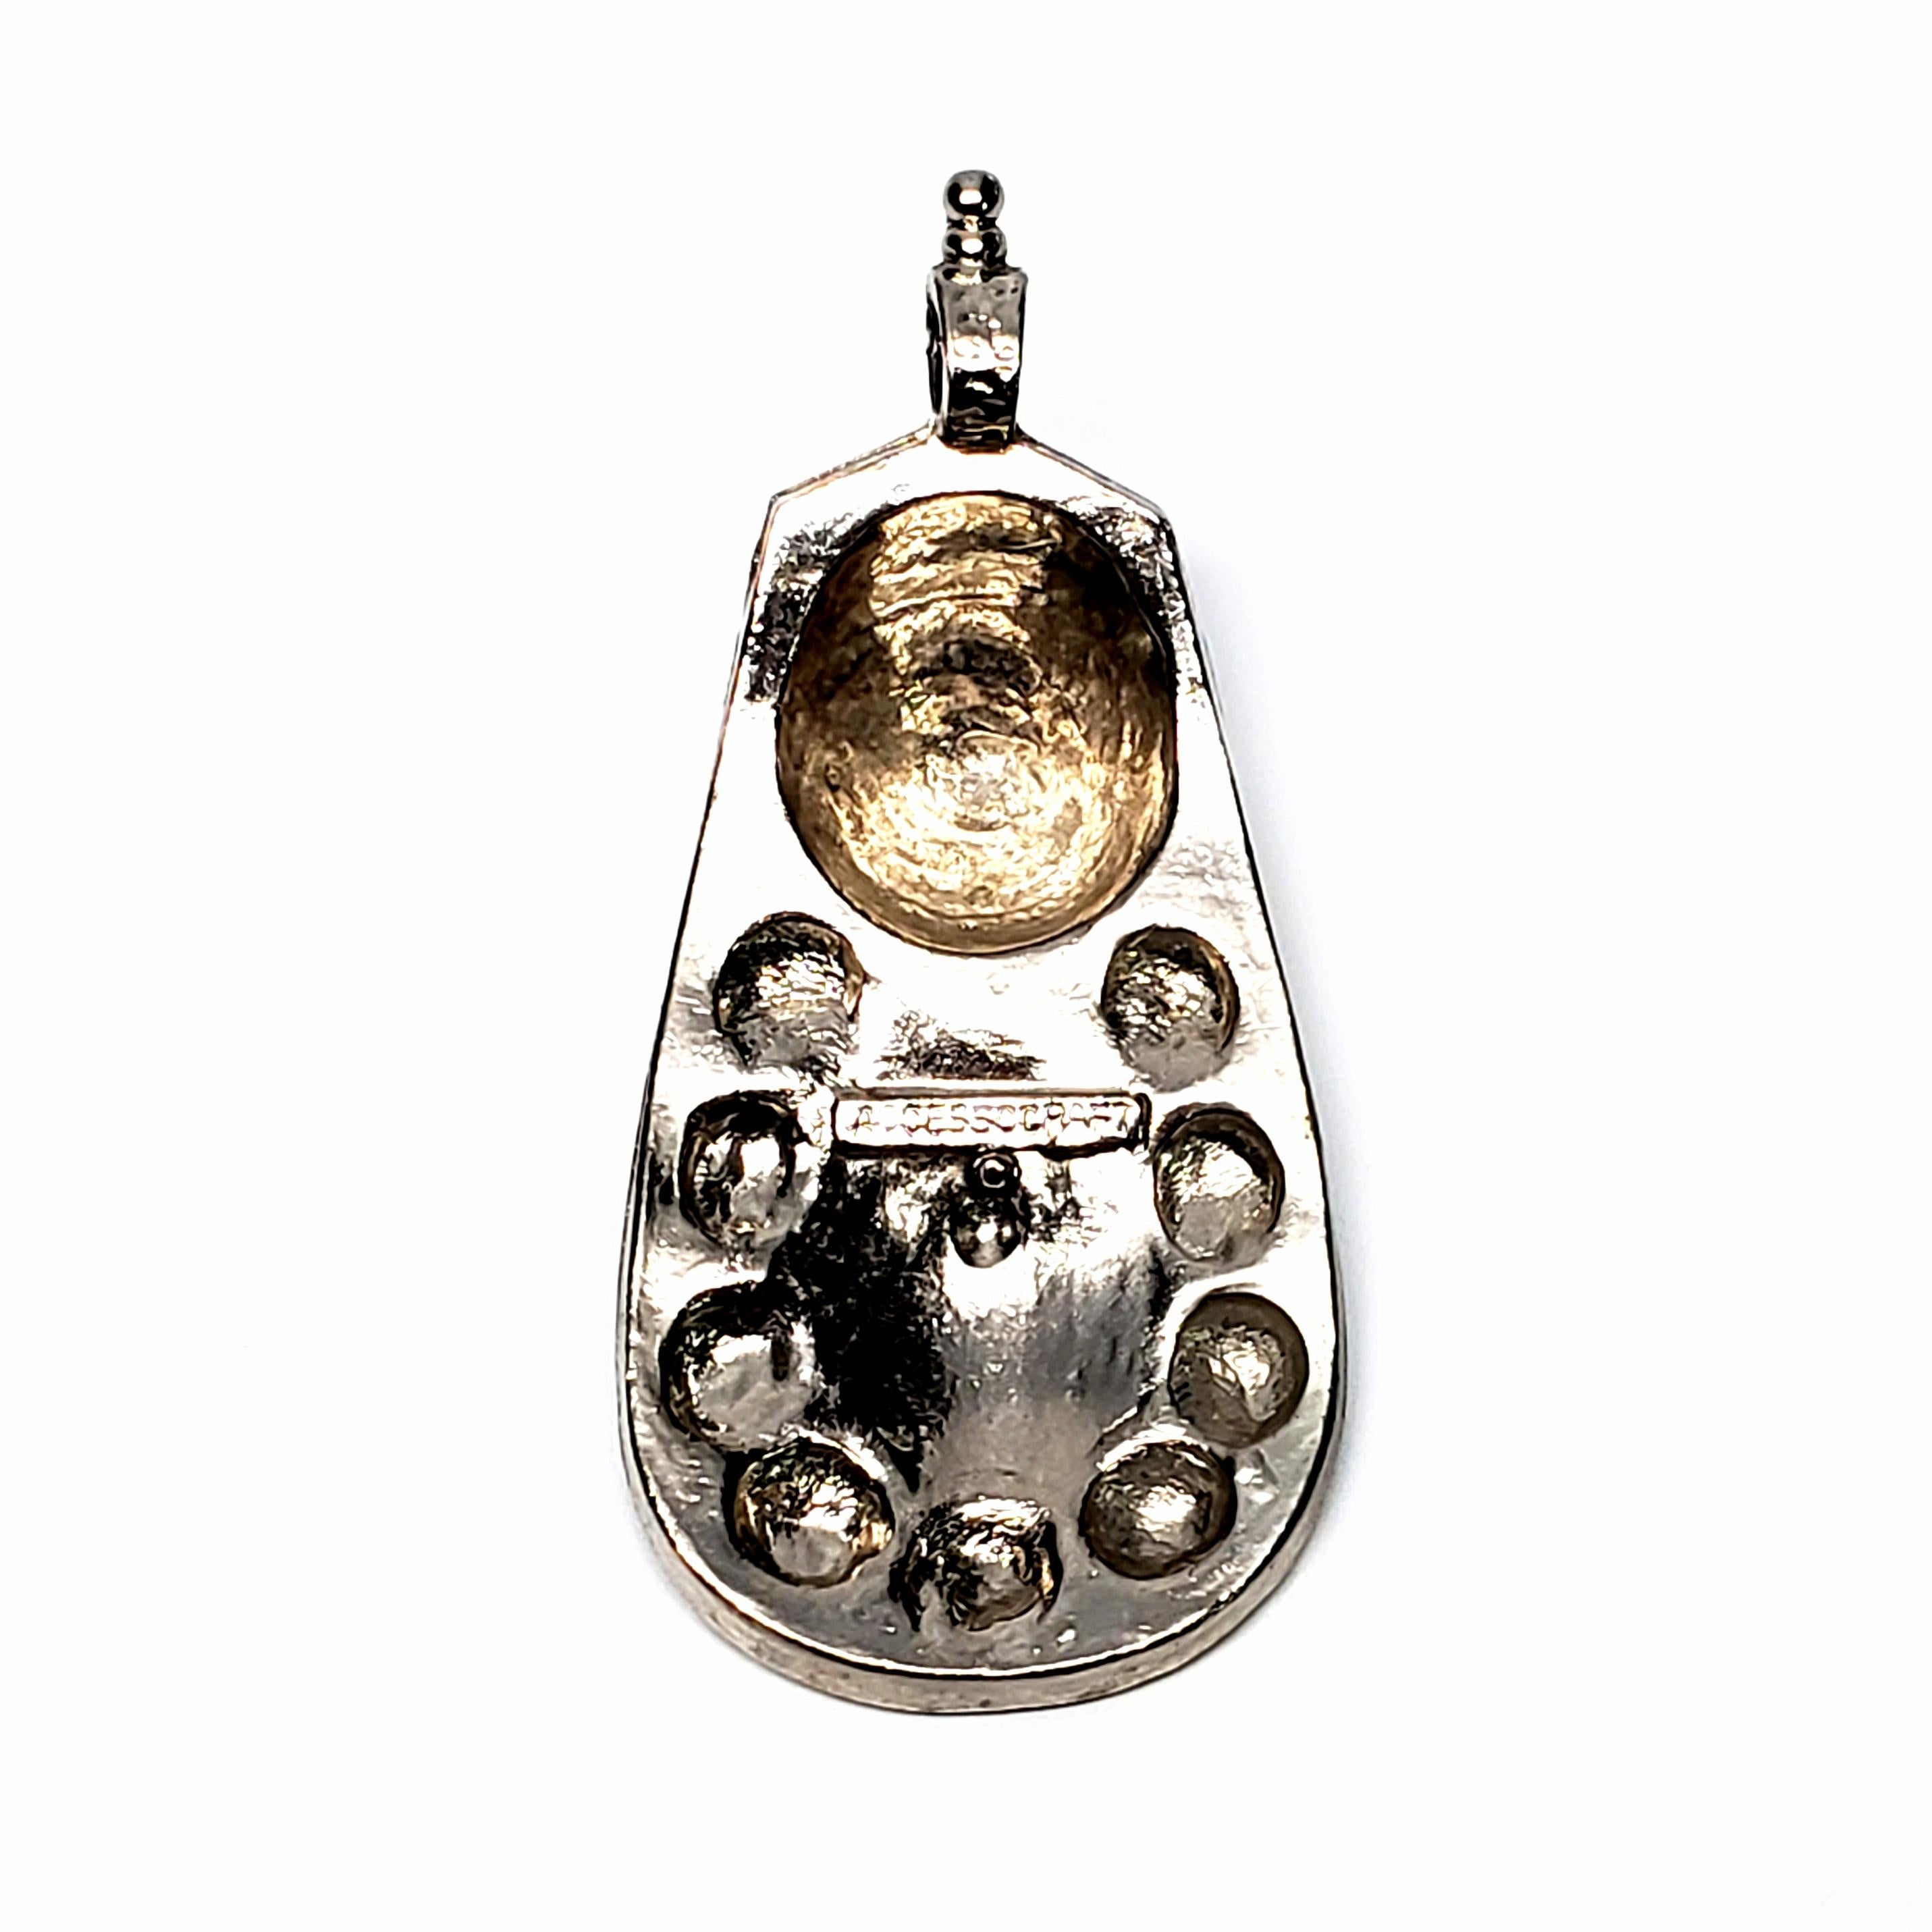 Vintage silver tone pendant by Accessocraft.

Accessocraft was founded in 1930 in NYC and was known for their innovative style and quality.

Measures approx 3